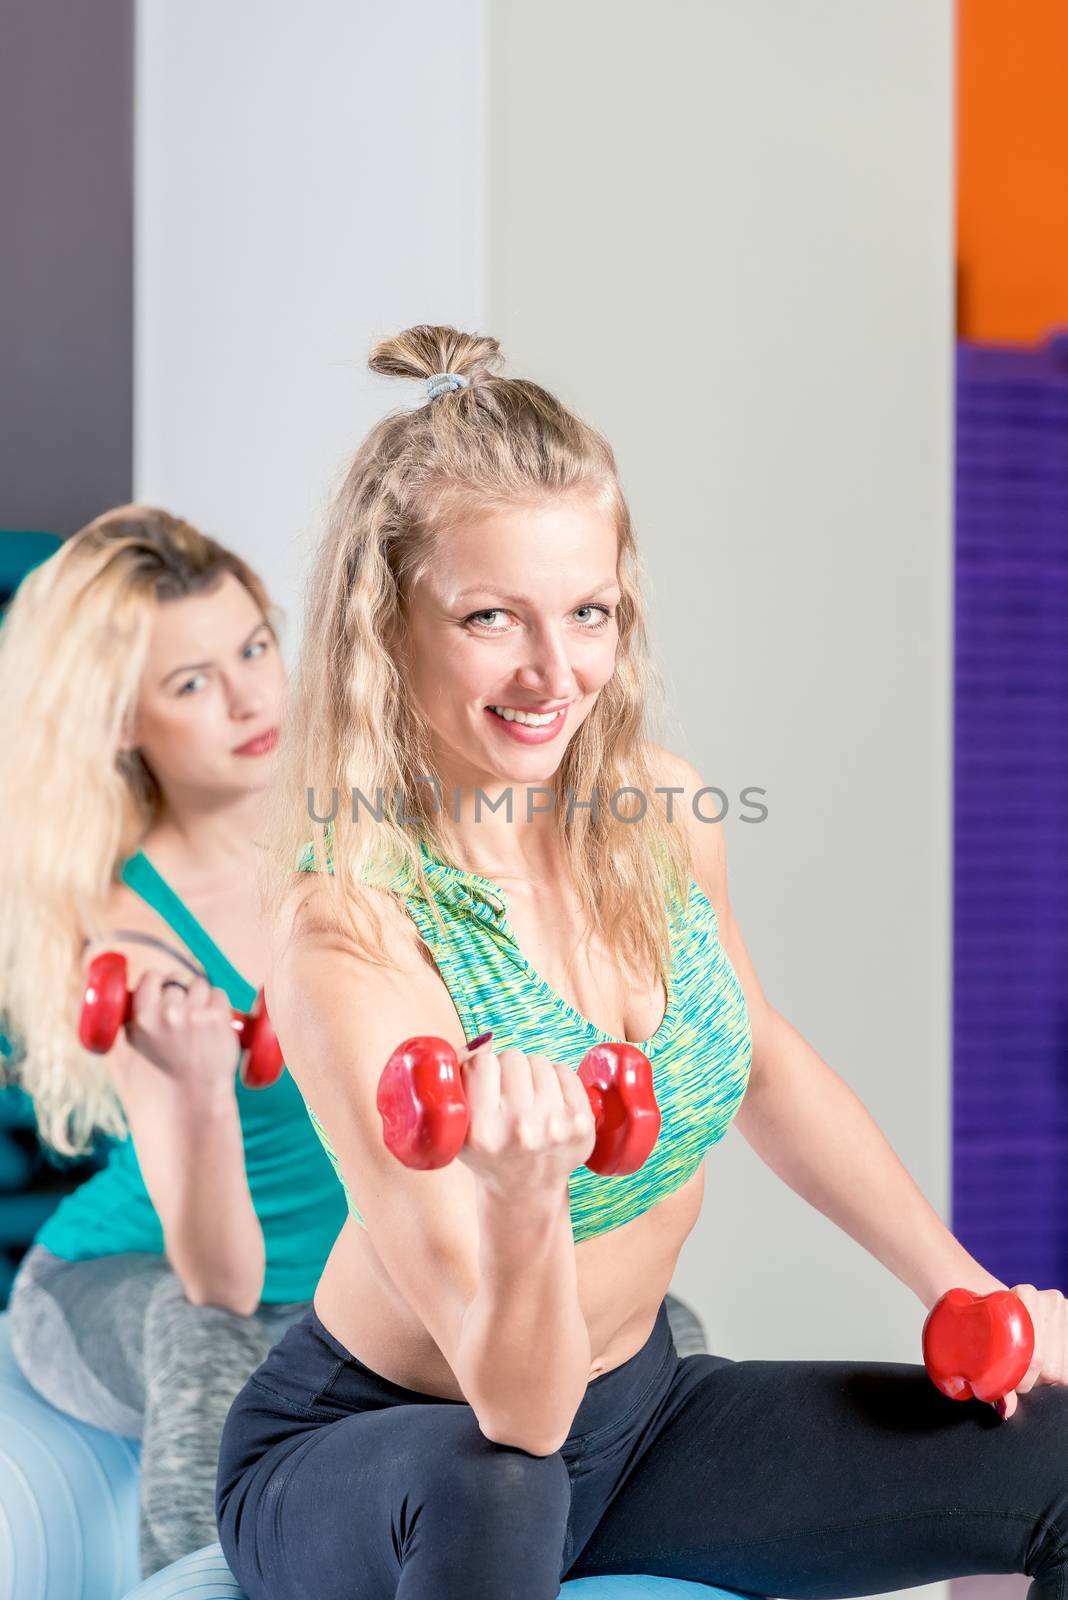 vertical portrait of a cute blonde with red dumbbells during a w by kosmsos111